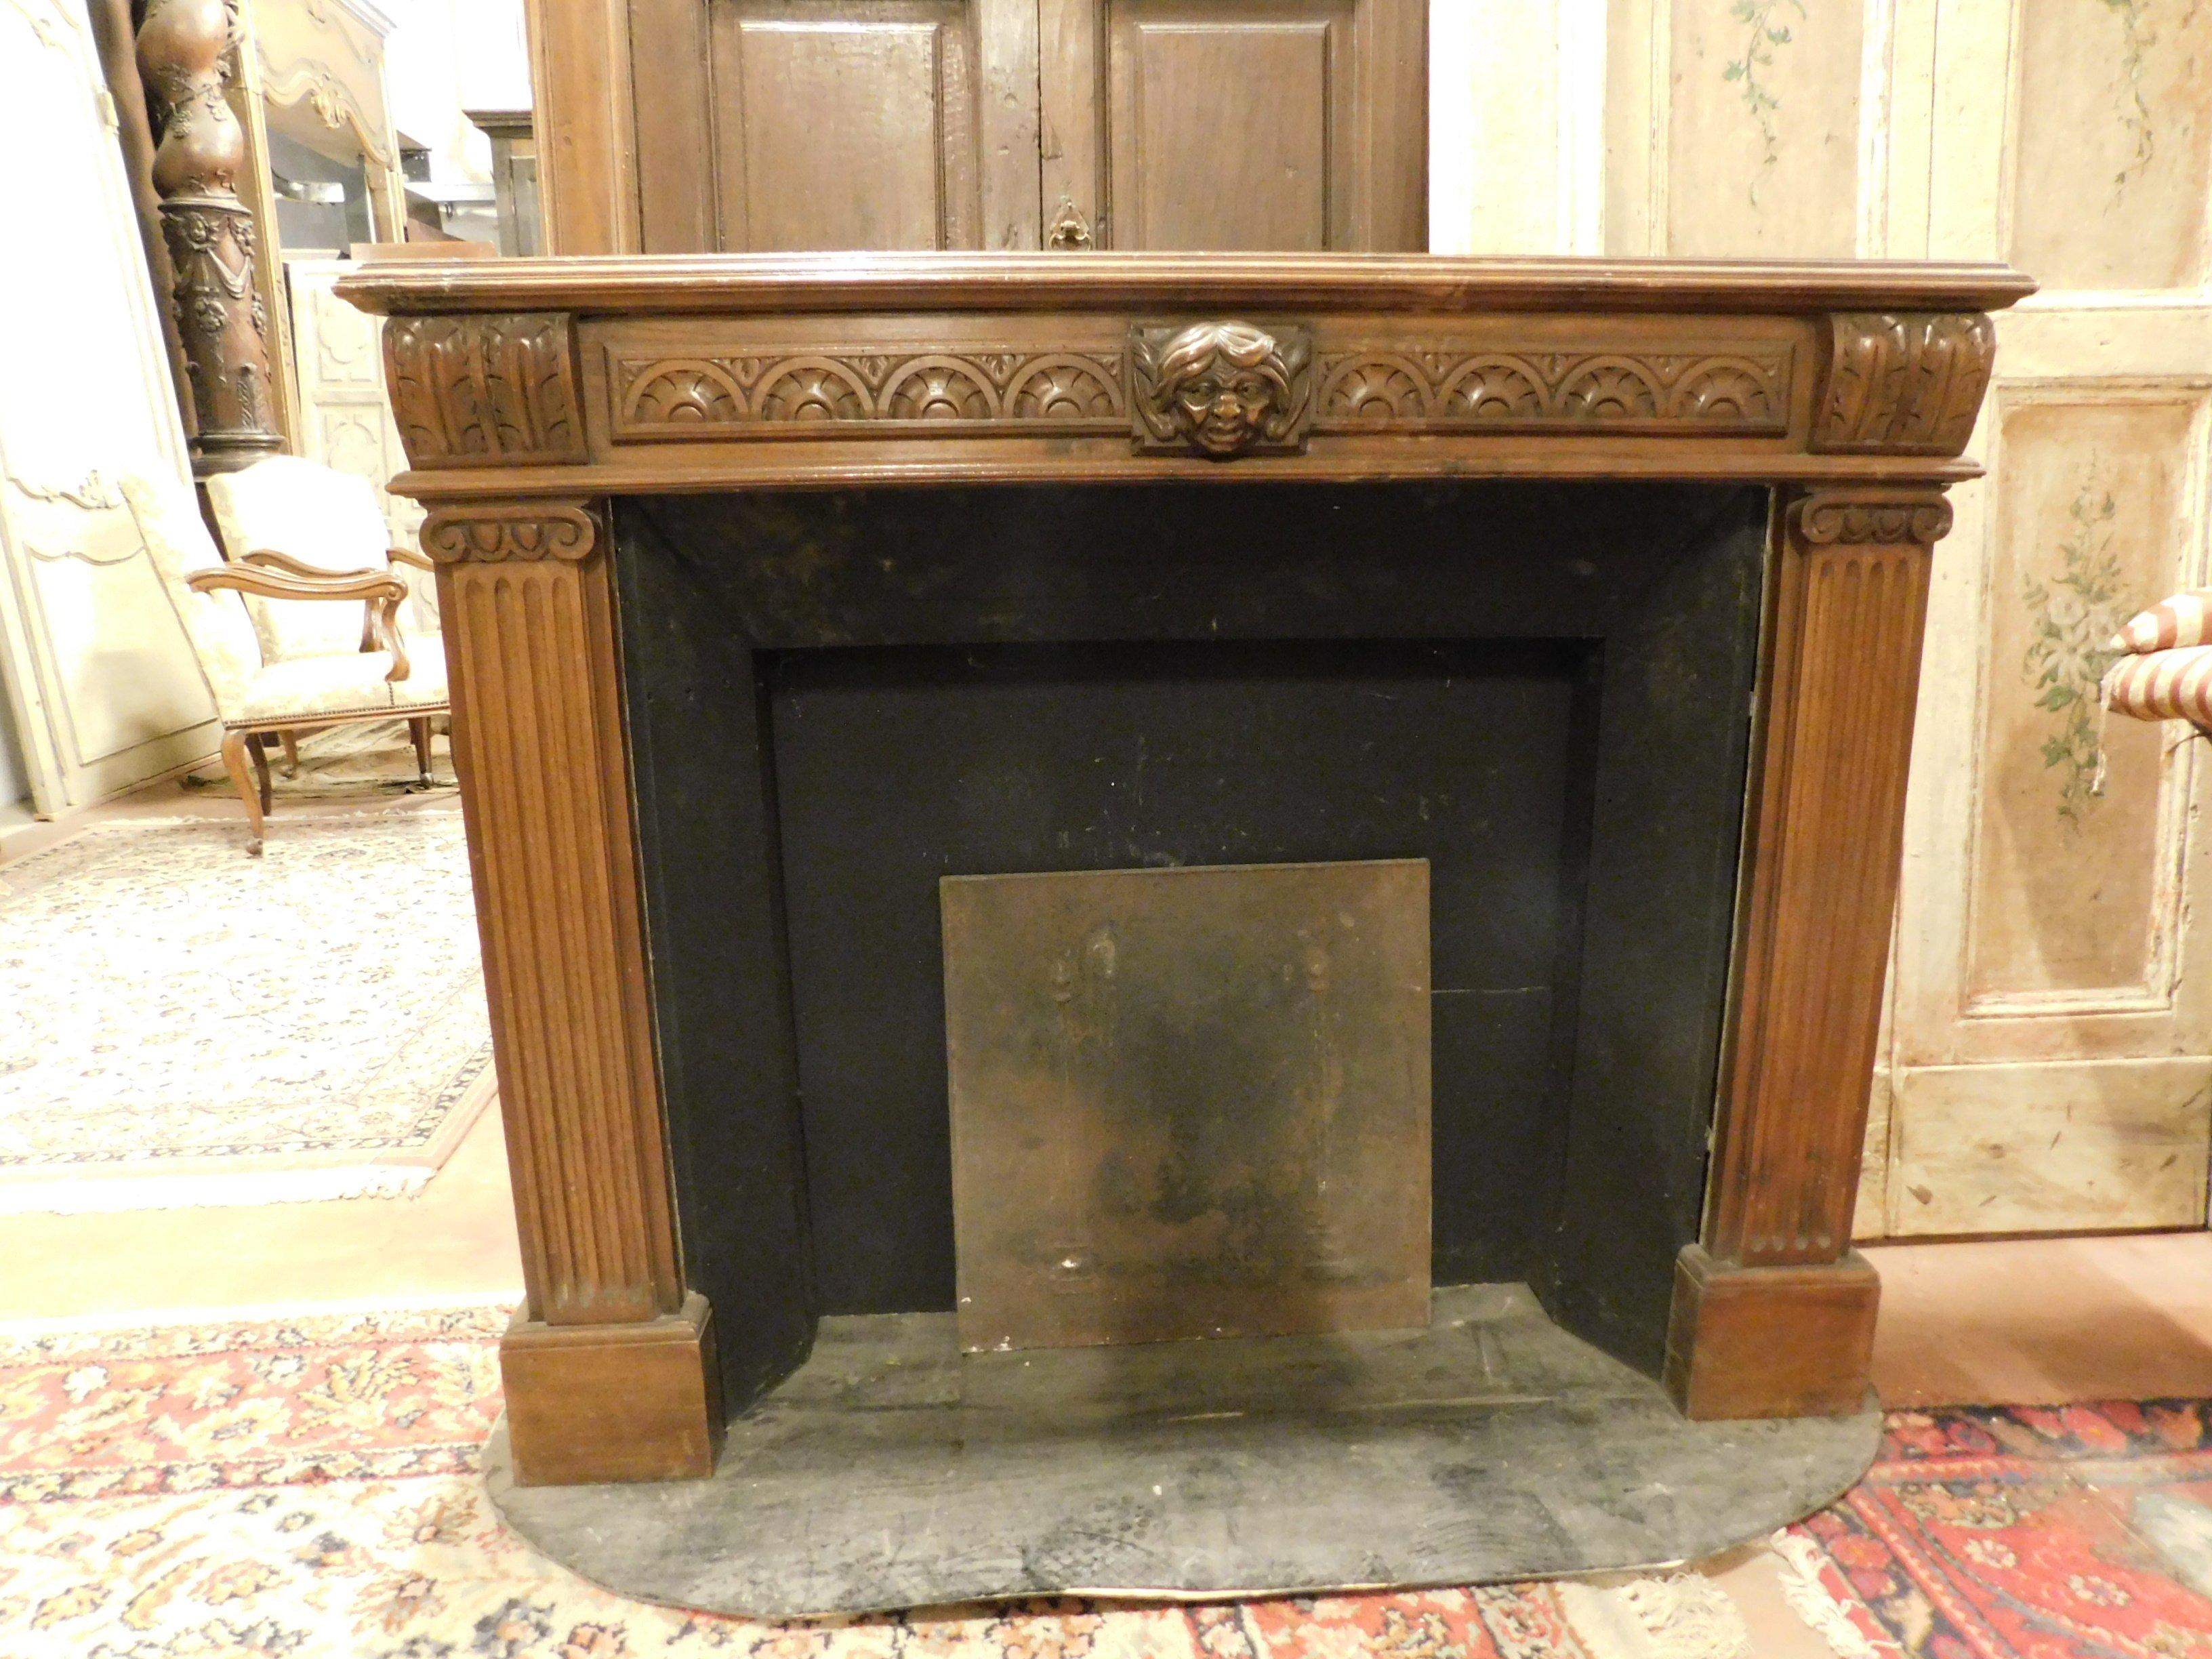 Ancient fireplace in precious wood, richly carved with satyr on the central pediment and tapered columns with capital, hand carved in the 19th century in Italy.
Of wood, therefore very versatile and easily adaptable or movable inside the rooms.